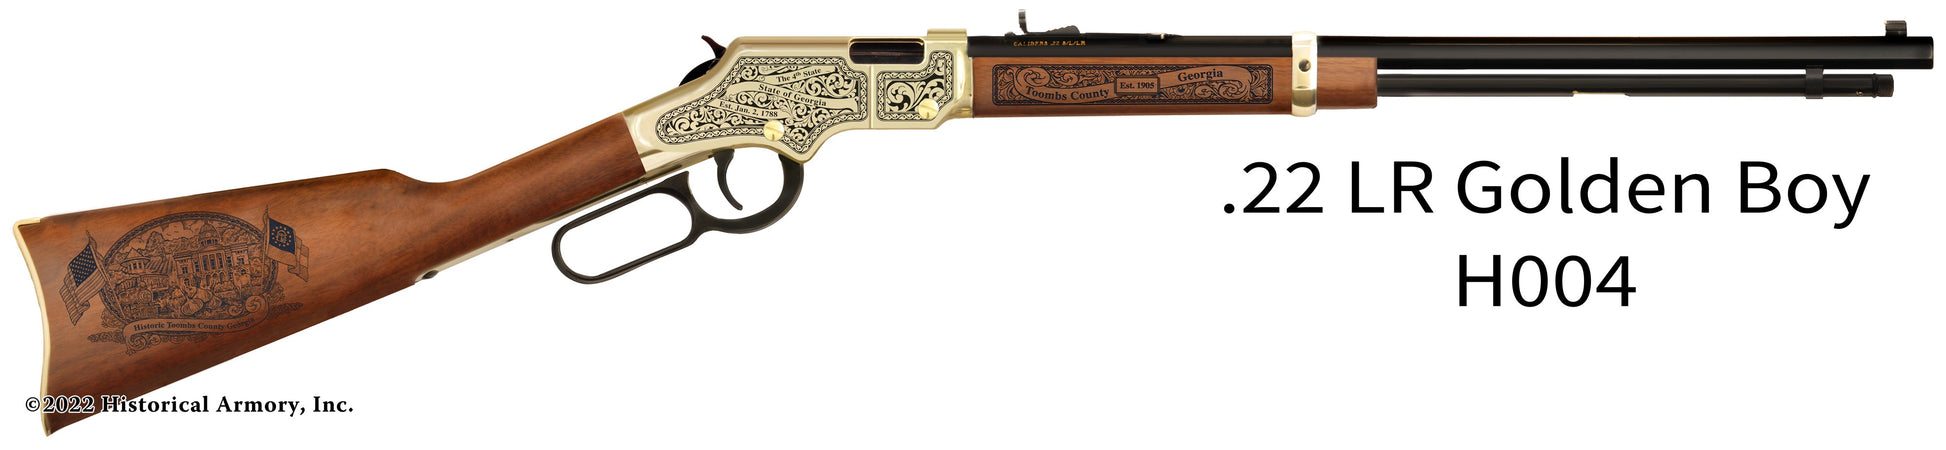 Toombs County Georgia Engraved Henry Golden Boy Rifle